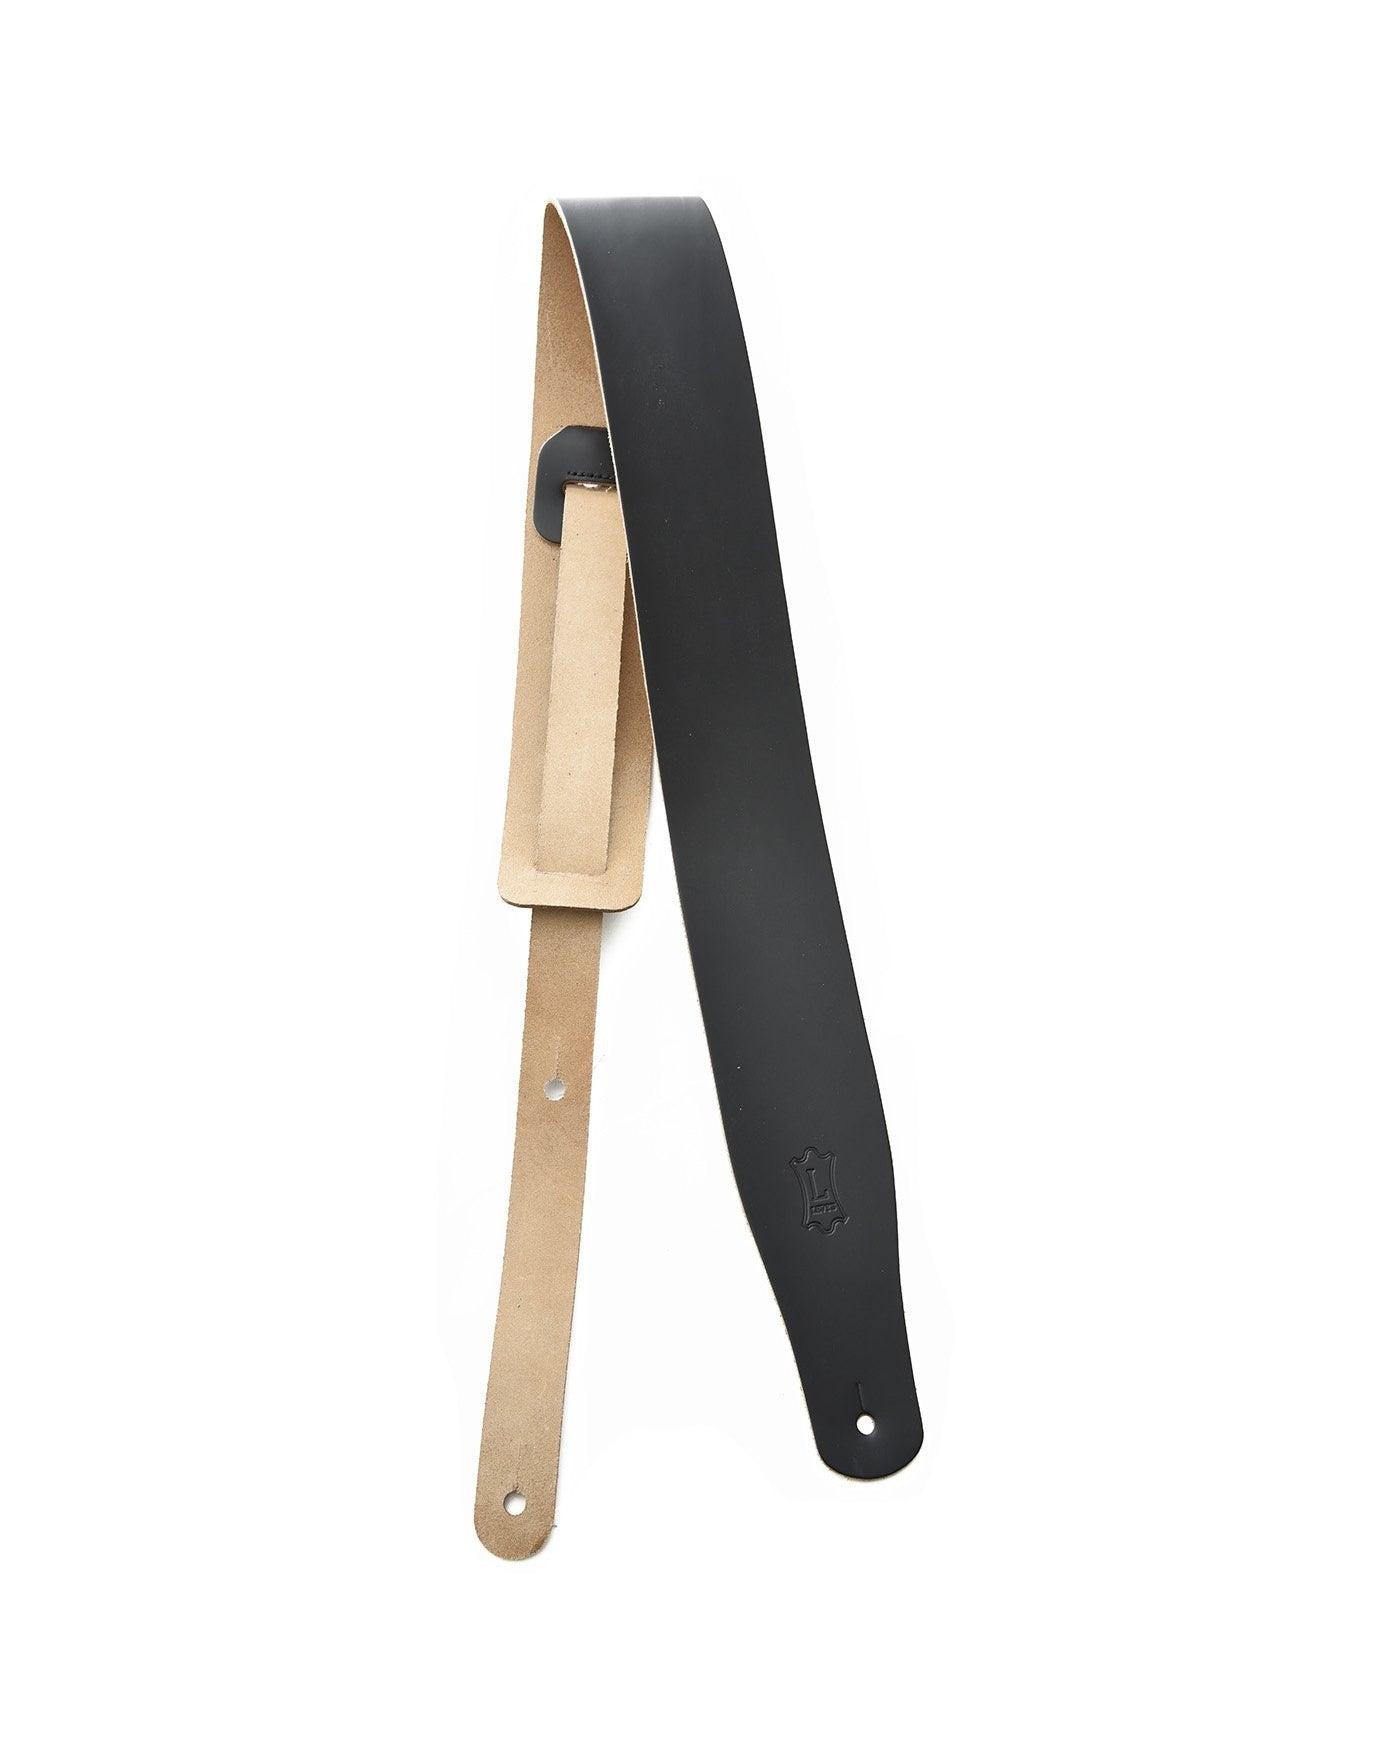 Image 1 of Levy Plain Leather Guitar Strap - SKU# M26 : Product Type Accessories & Parts : Elderly Instruments